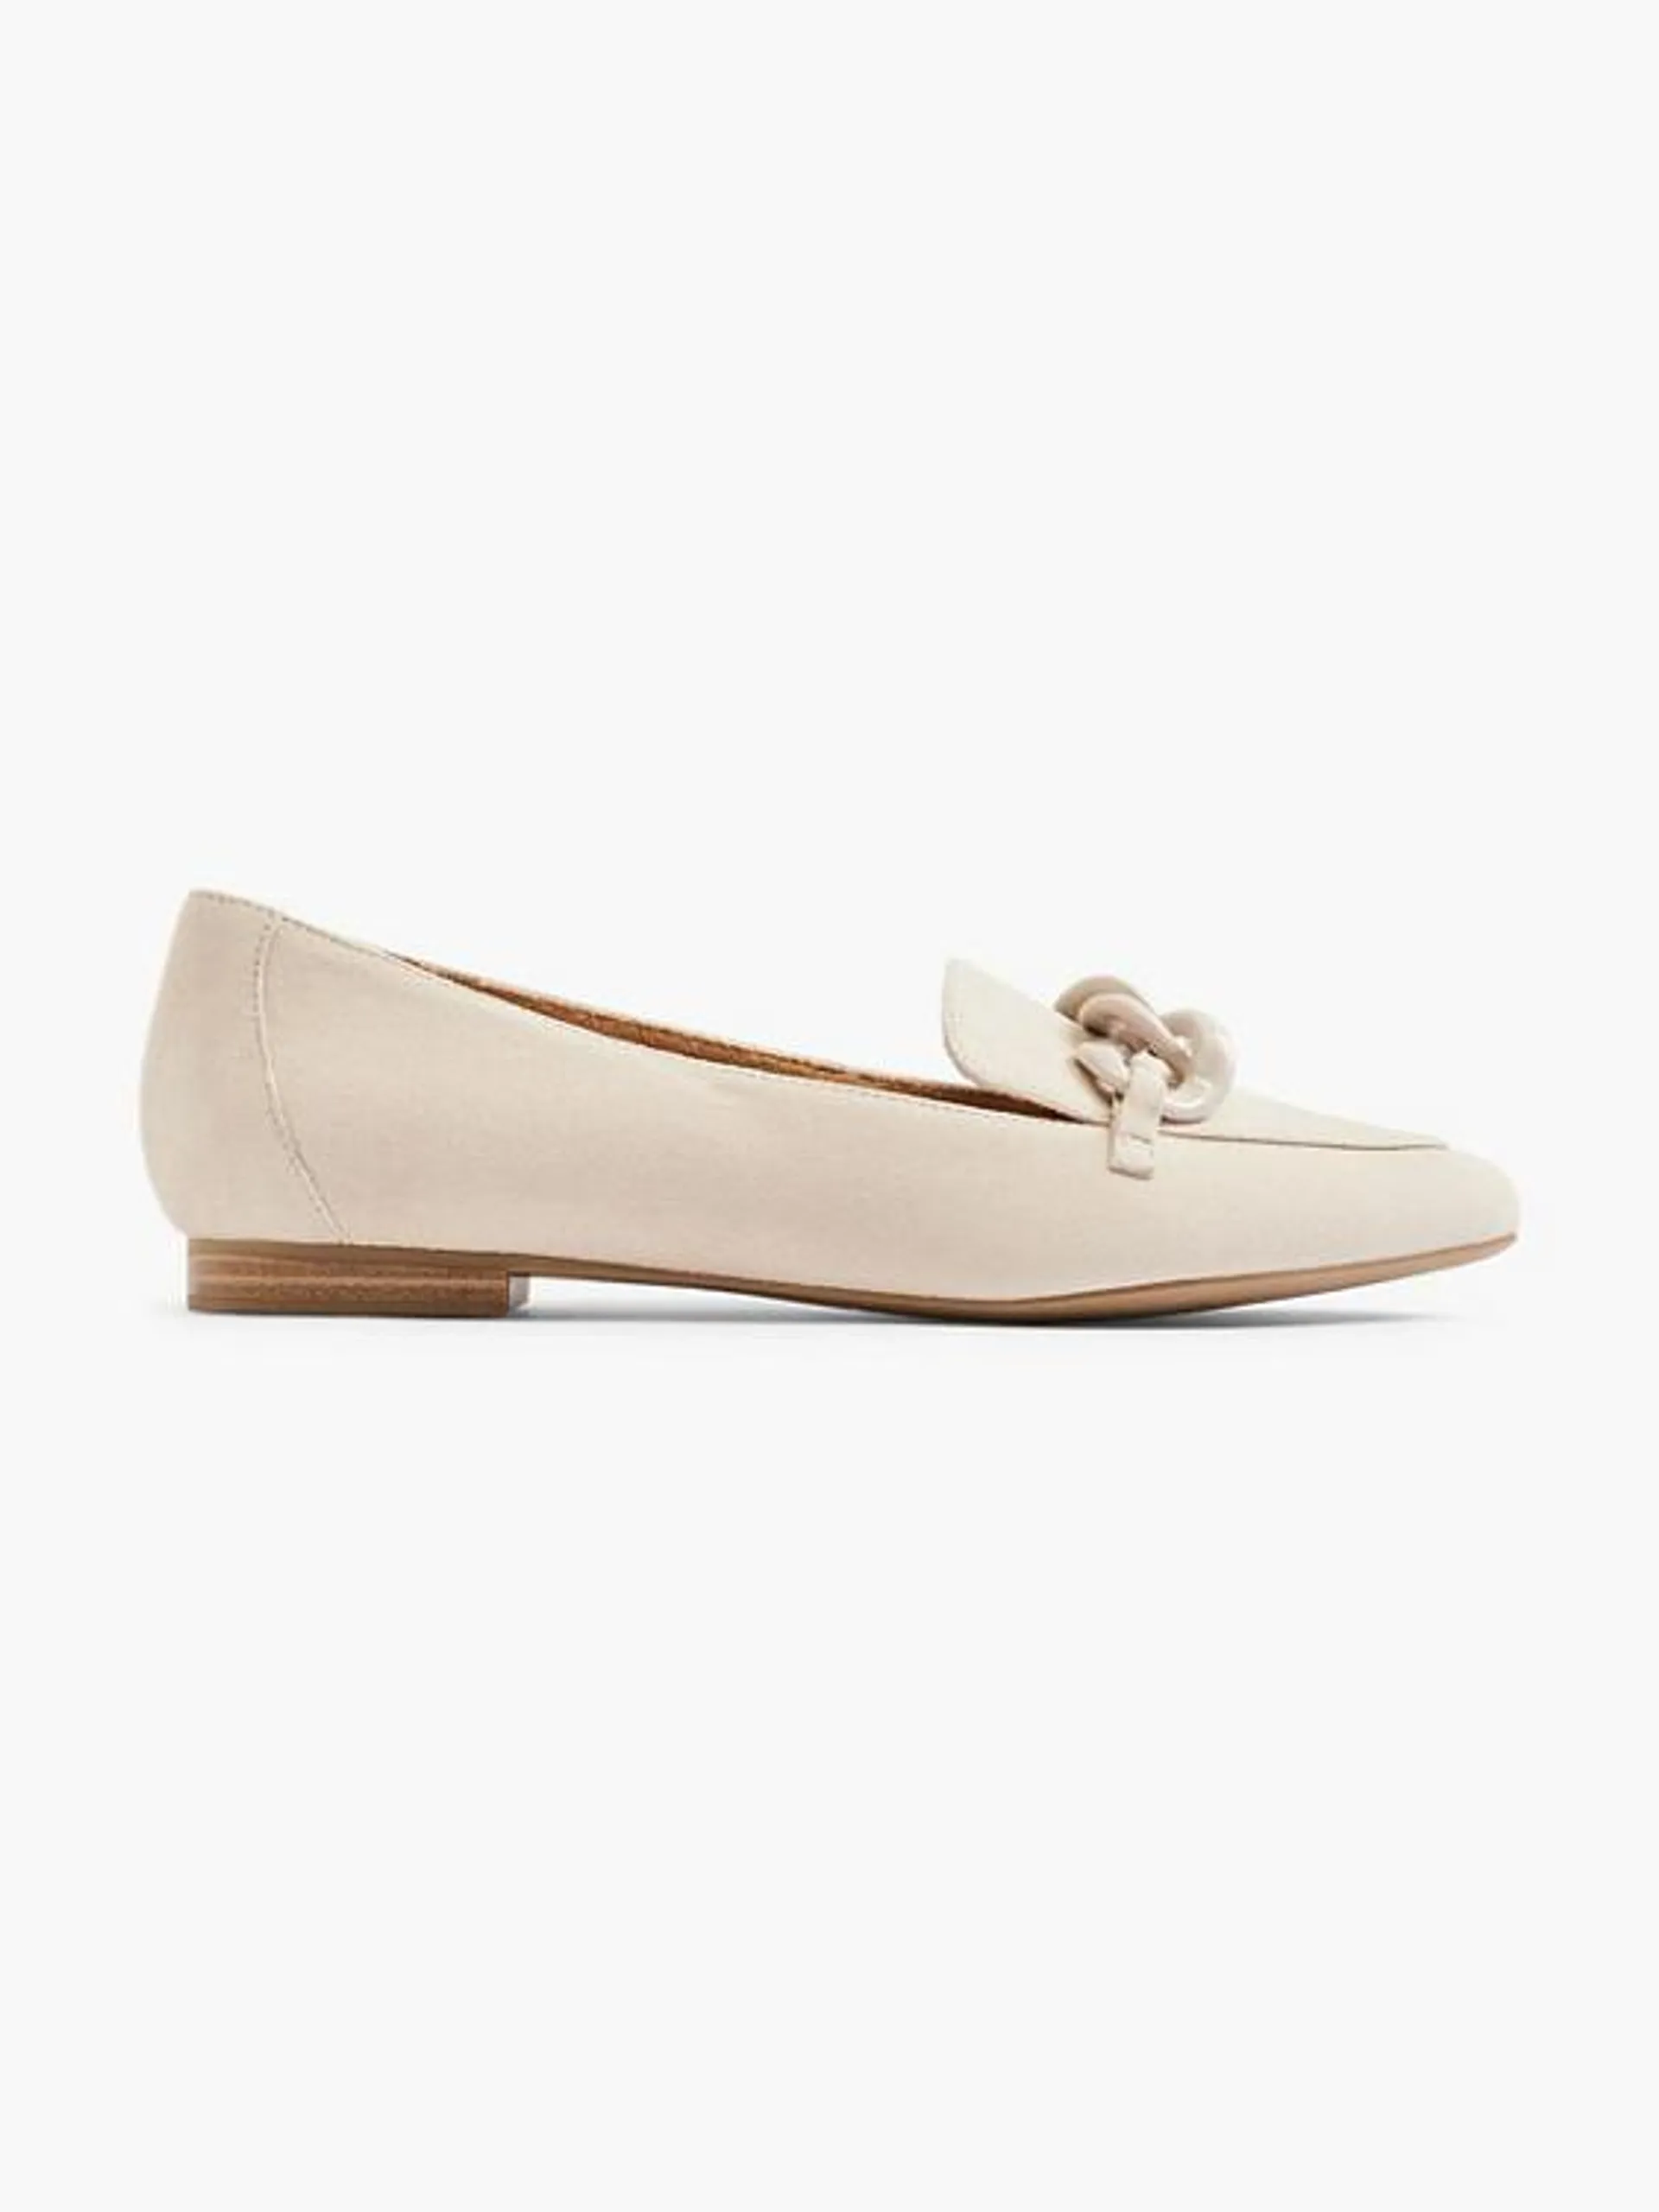 Nude Leather Flat Loafer with Matching Chain Detail